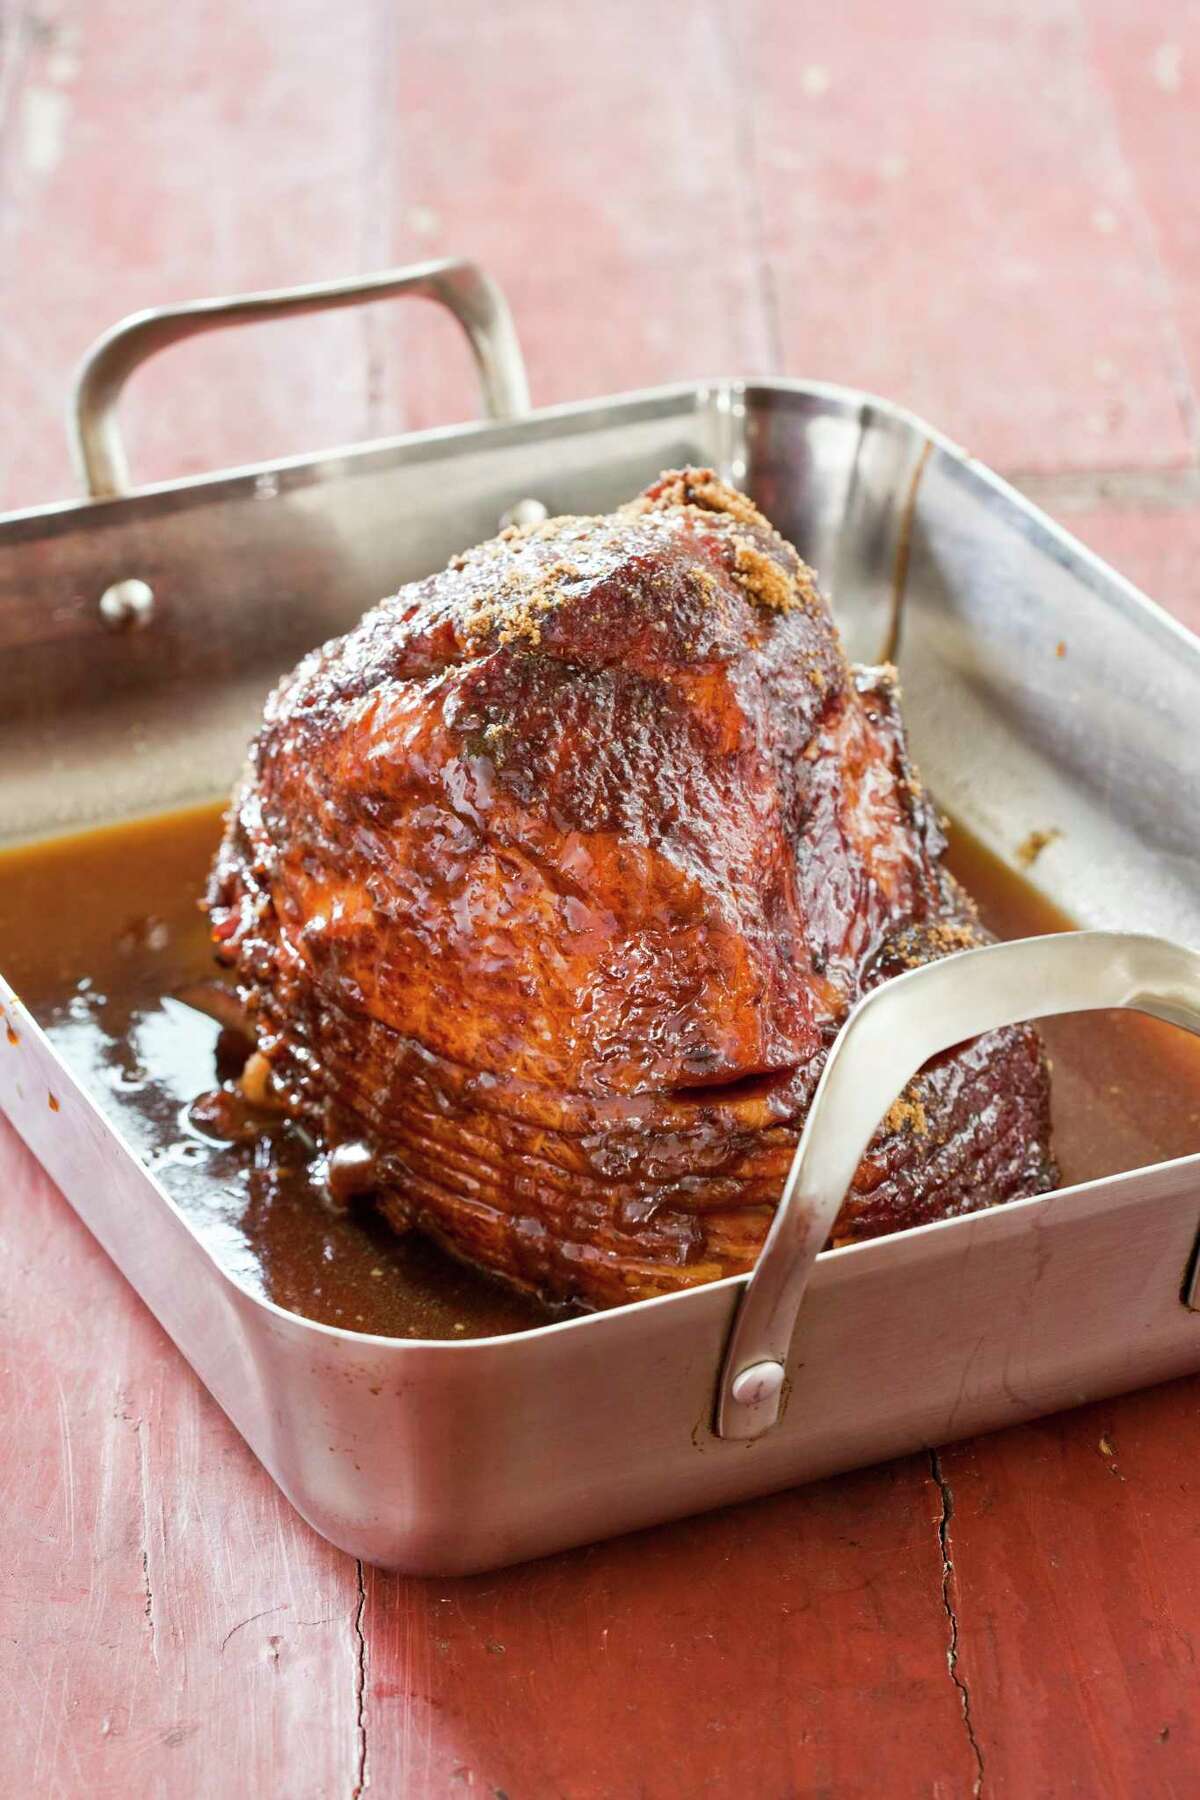 Create an Easter menu Create a menu your family can help cook from scratch. Use family recipes or visit sites like Magnolia for meal ideas from Texas' own Joanna Gaines. Maple-Glazed Ham, which requires an oven bag, makes a flavorful center-of-the-plate meal for Easter Day dinner.